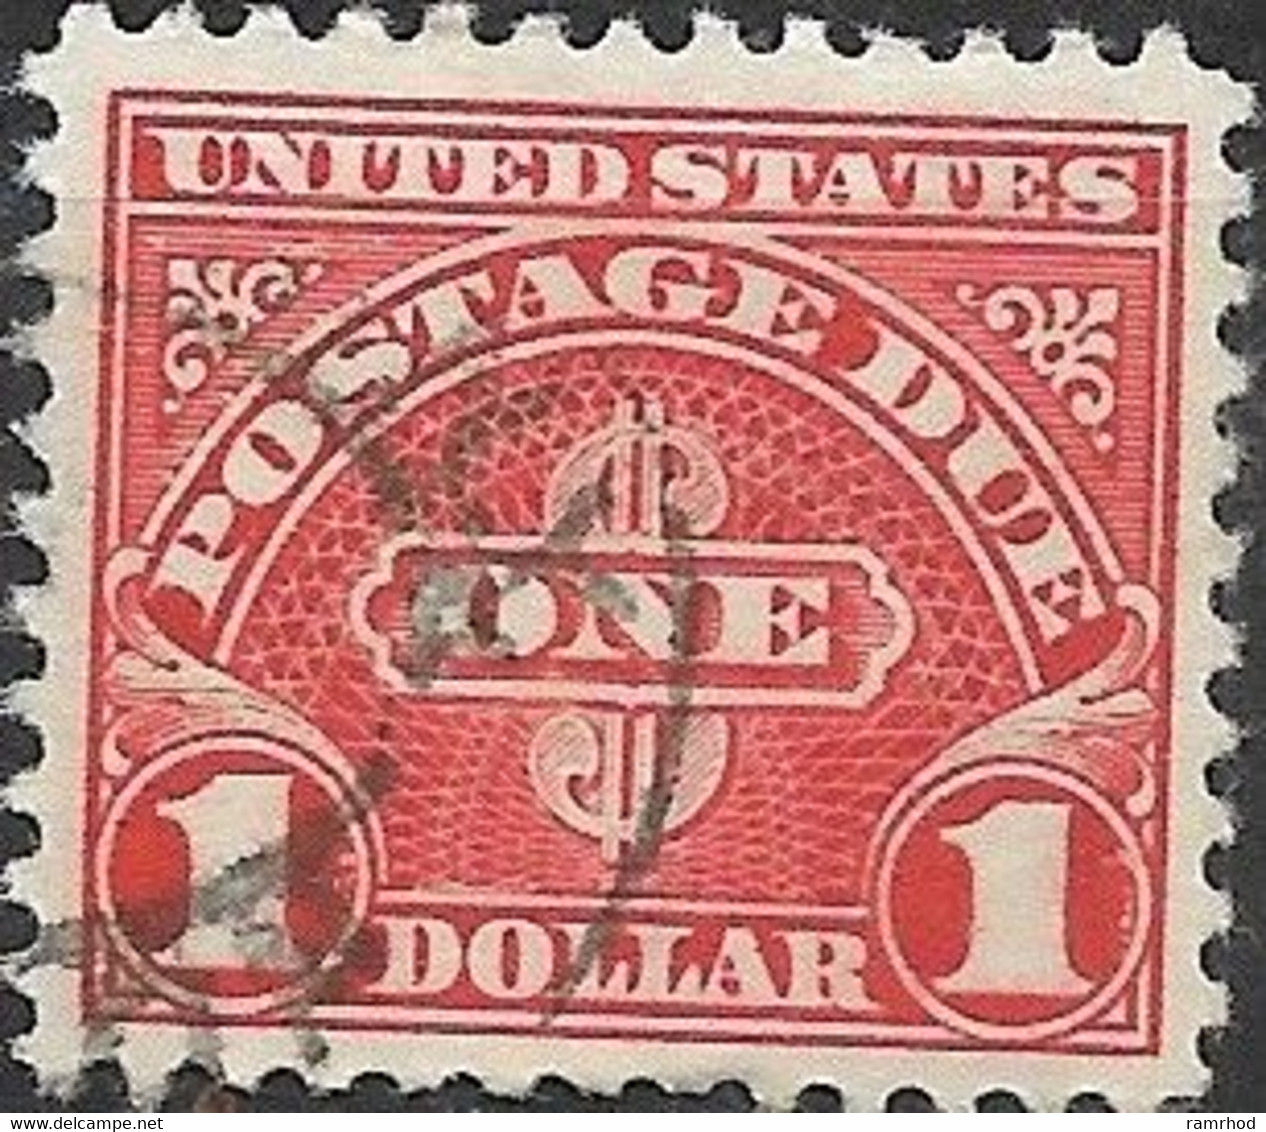 USA 1930 Postage Due - $1 - Red FU - Postage Due